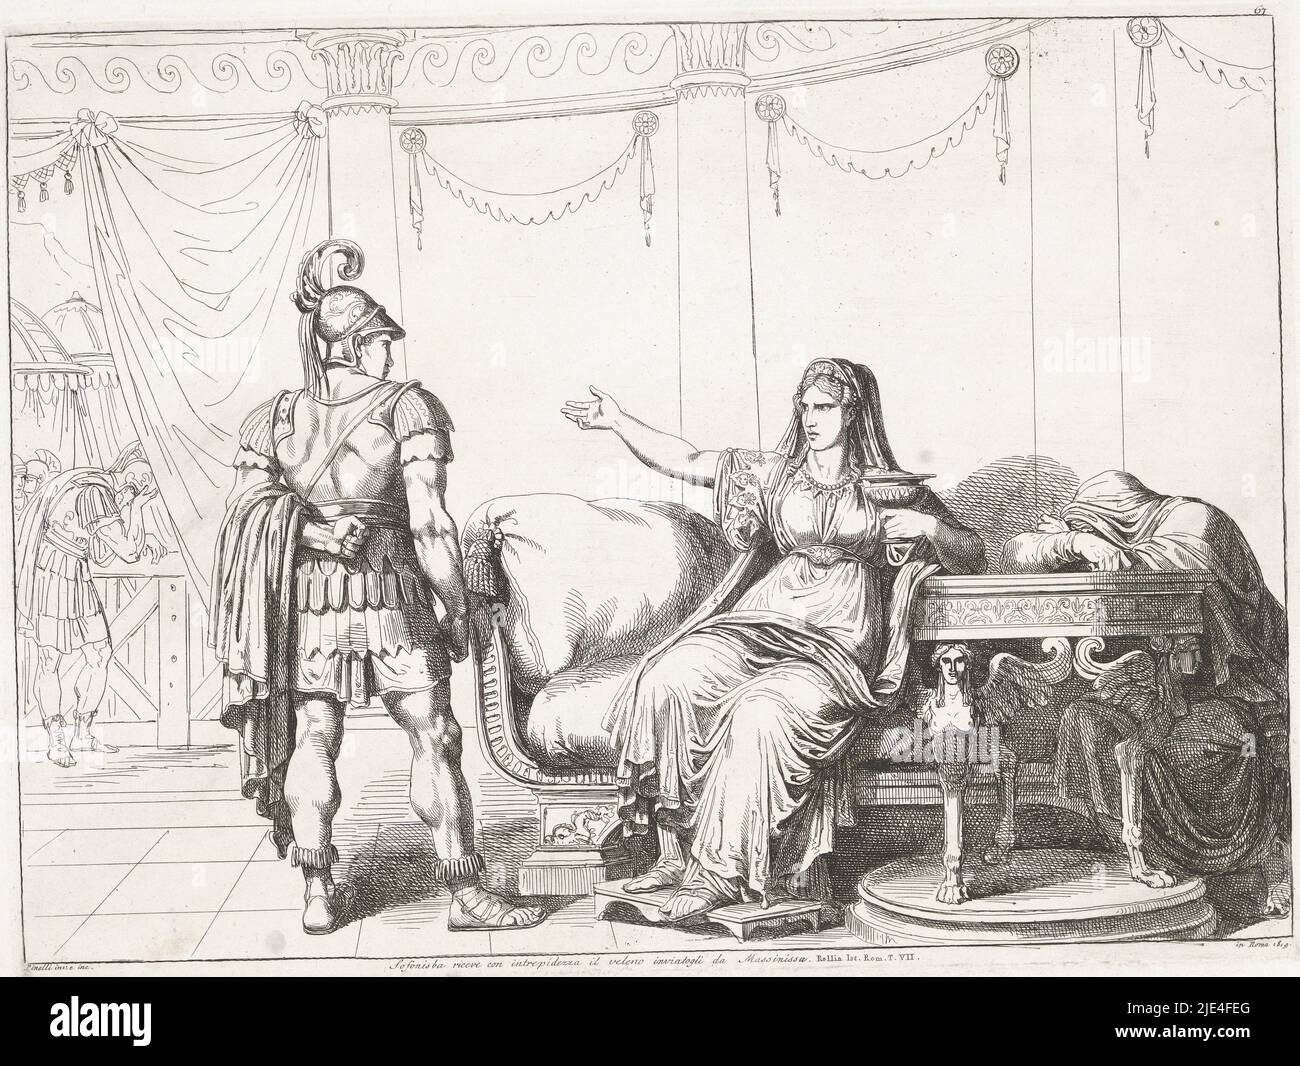 Sophonisba drinks poison, Bartolomeo Pinelli, 1819, Sophonisba seated with poison cup in hand. Before her a servant of her second husband Massinissa, who brought the poison cup., print maker: Bartolomeo Pinelli, (mentioned on object), Bartolomeo Pinelli, (mentioned on object), Rome, 1819, paper, etching, h 316 mm × w 427 mm Stock Photo